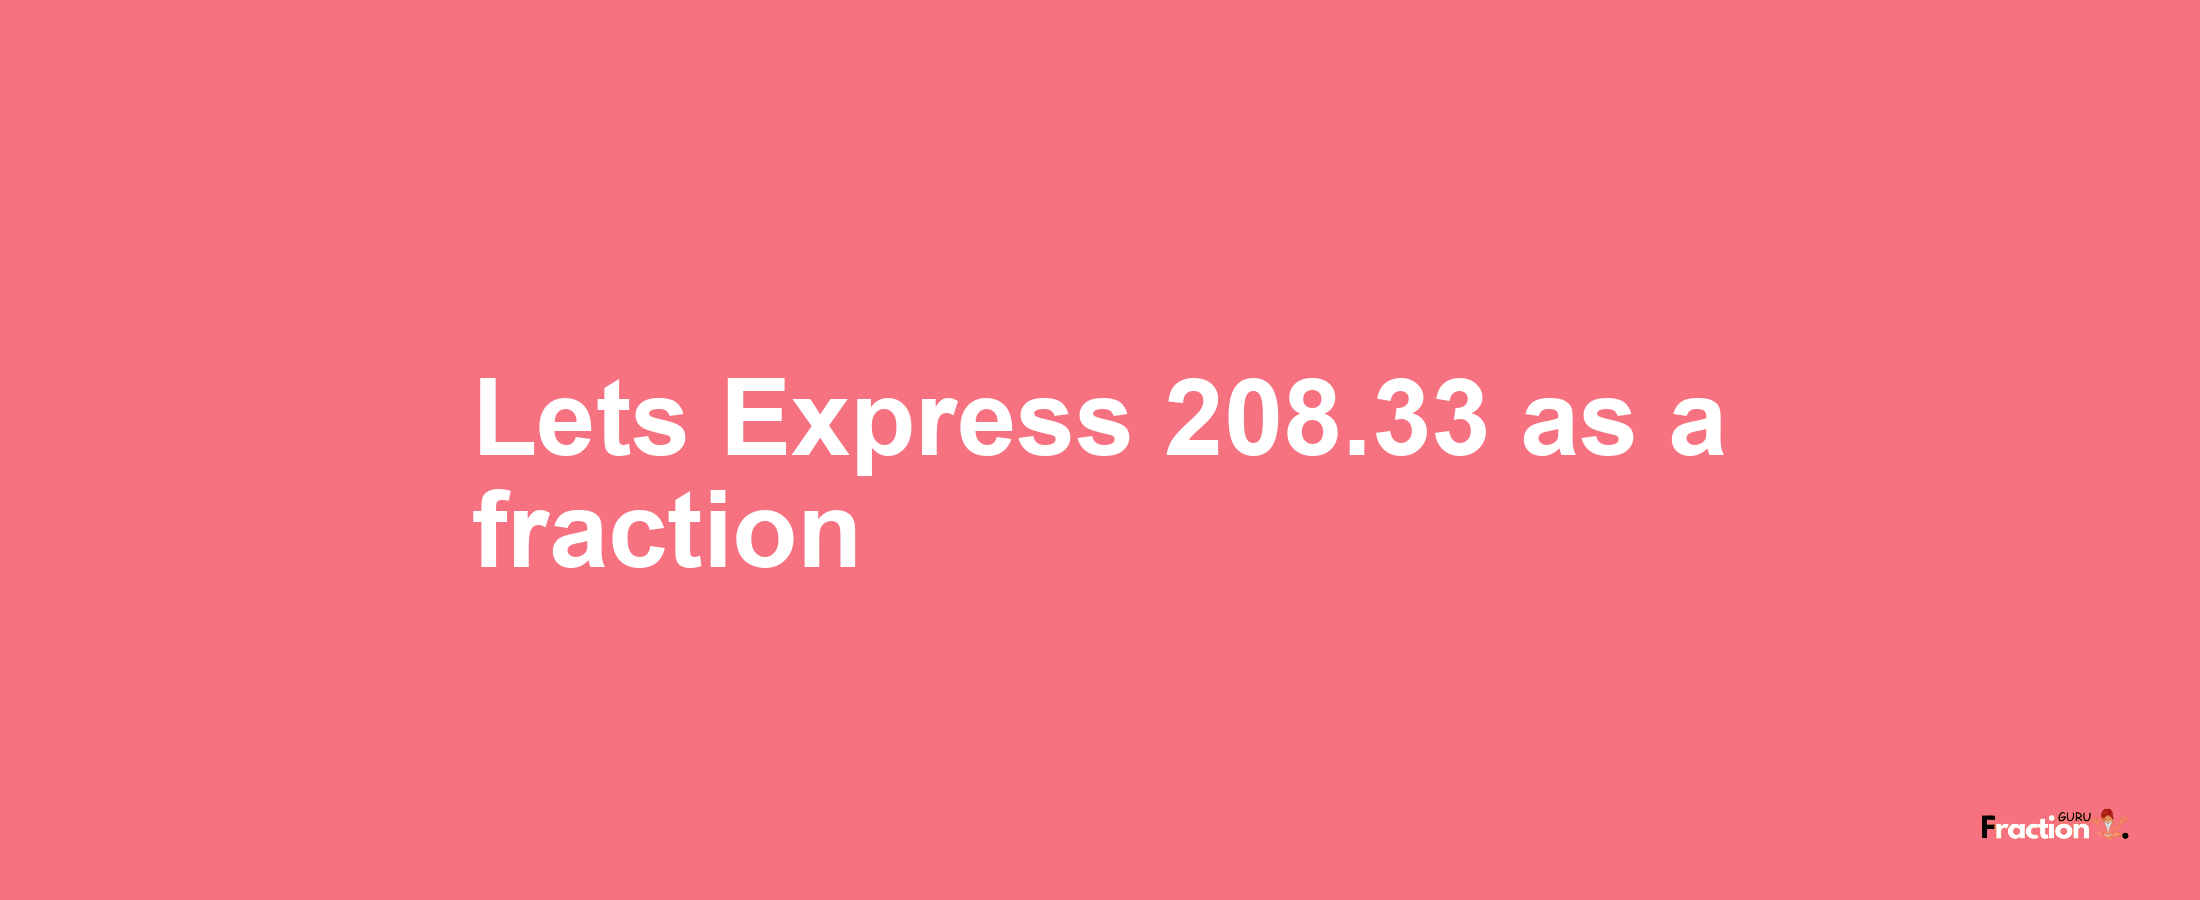 Lets Express 208.33 as afraction